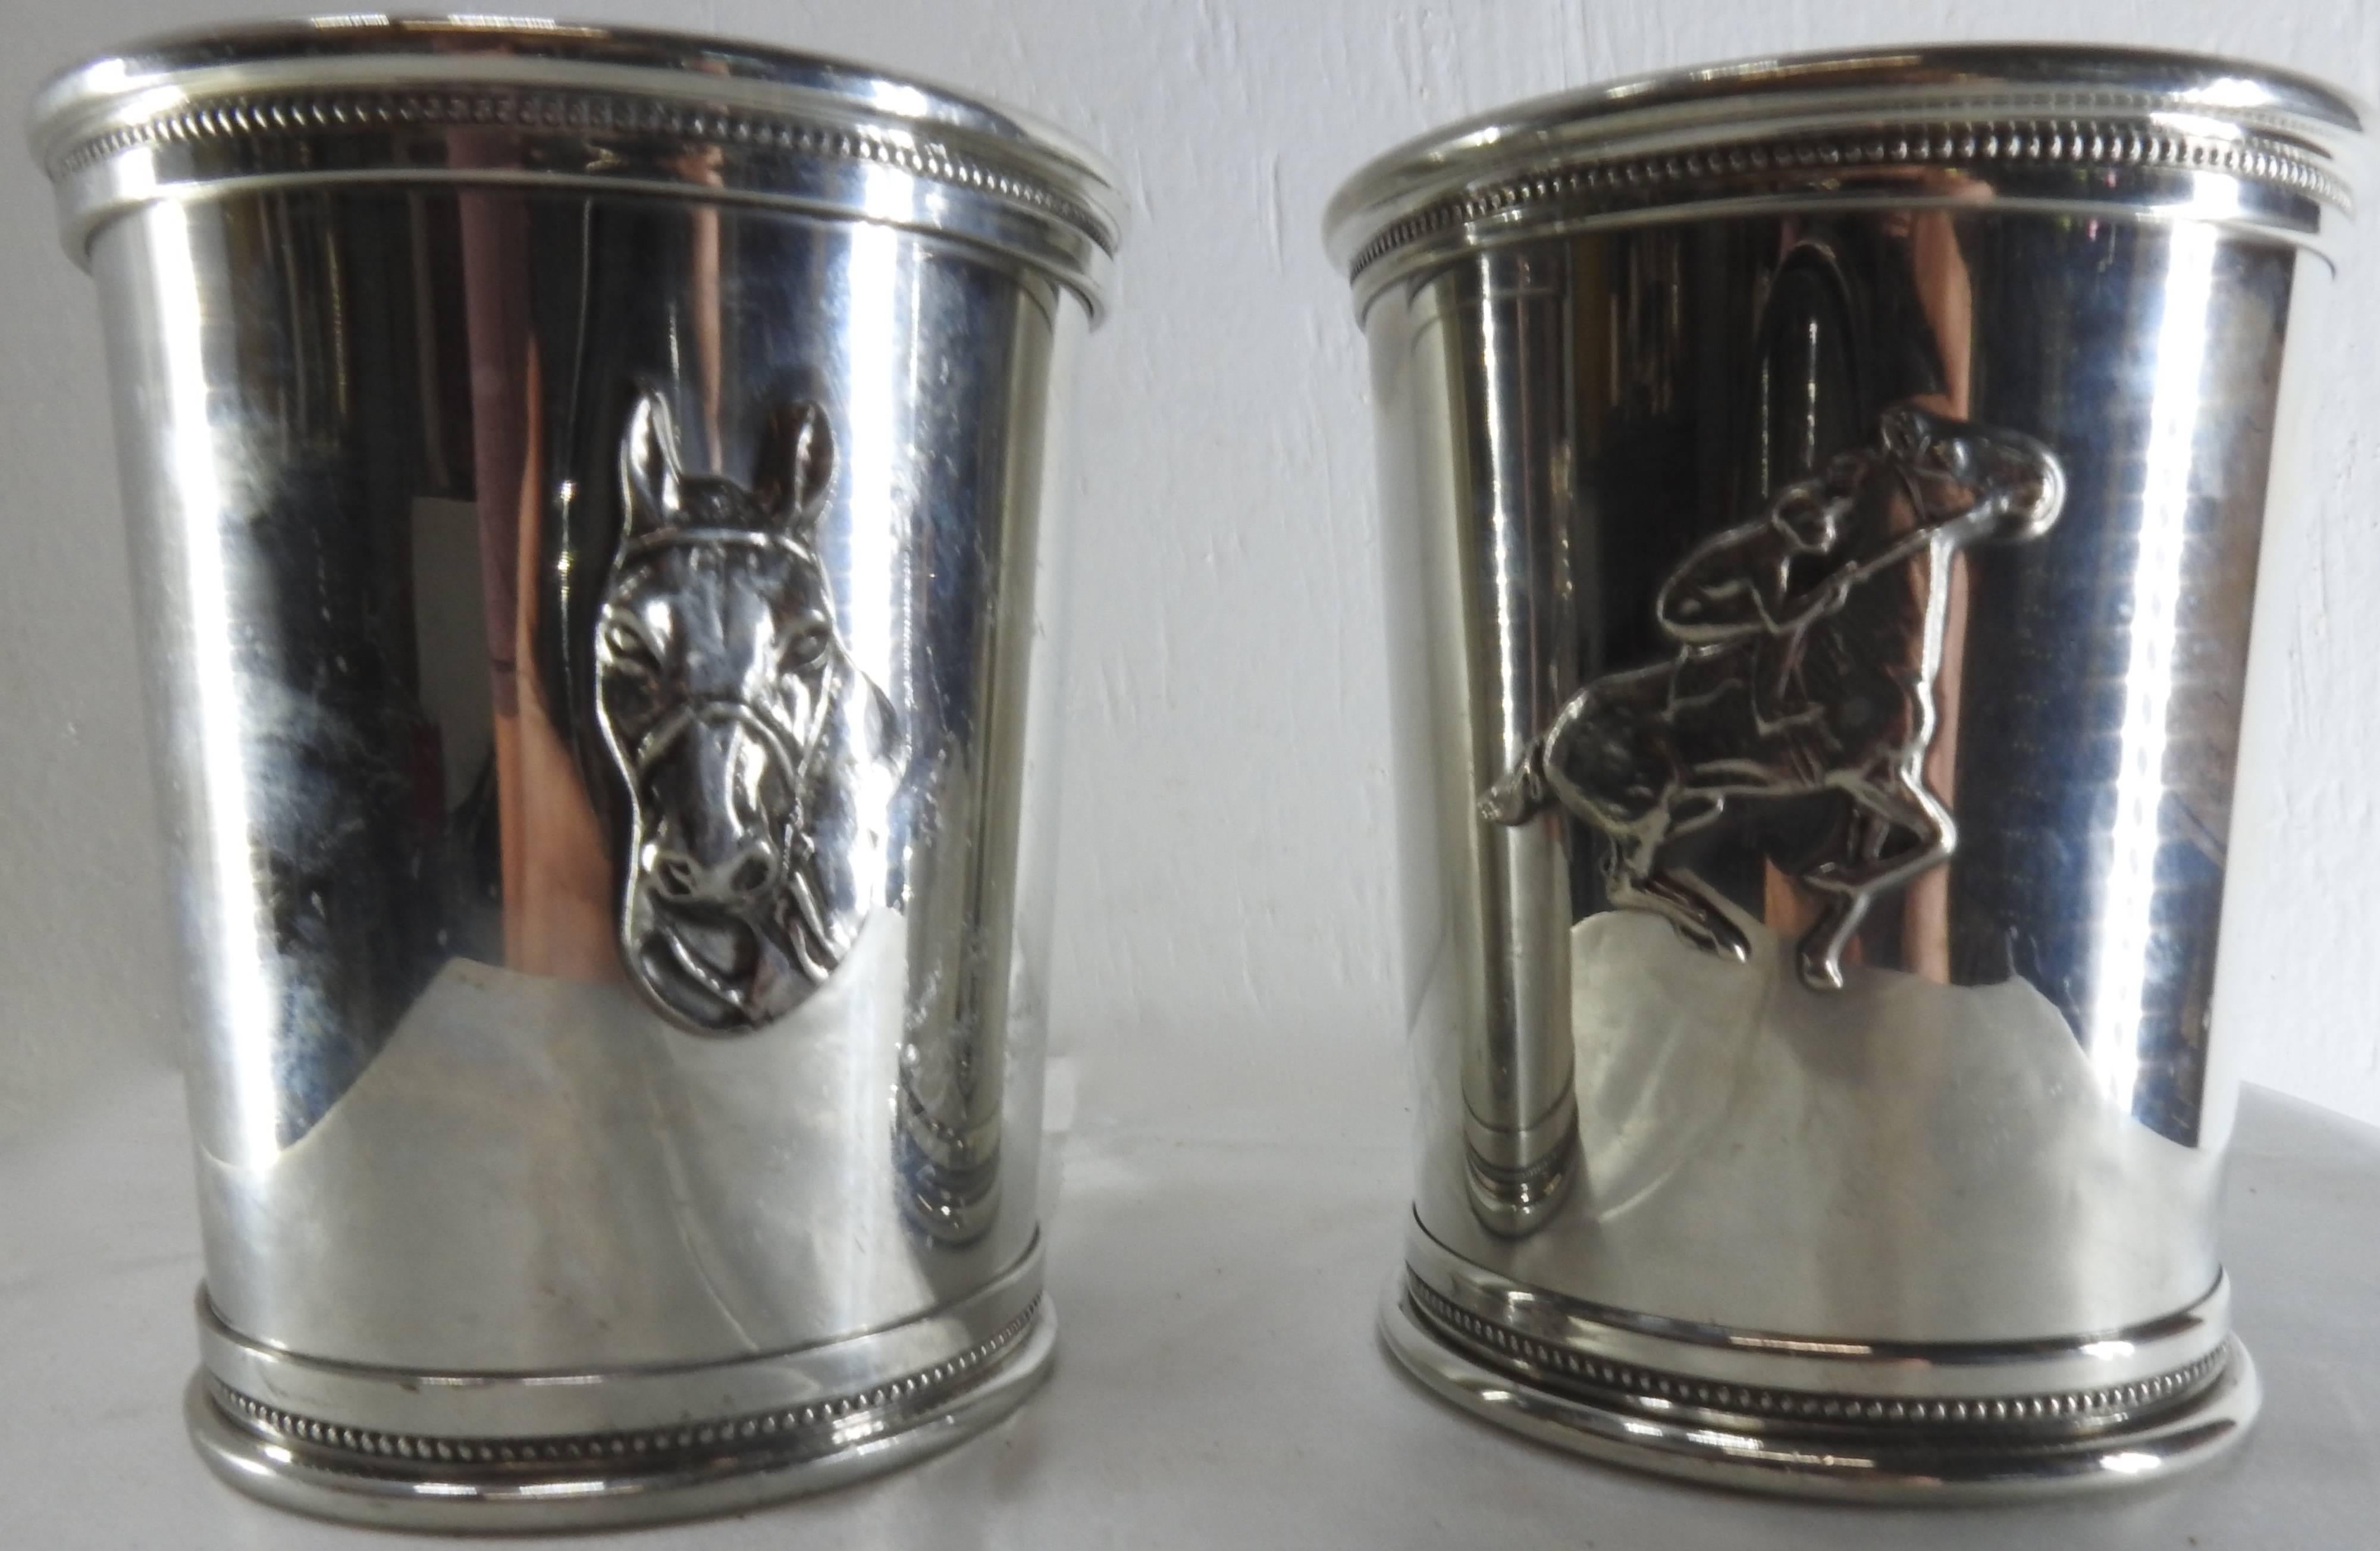 This is a nice pair of pewter mint julep cups featuring two different horse motifs. They are Governors Cups by Boardman. One of the cups features a jockey with a race horse and the other has a horse head. These are raised emblems on the cups.